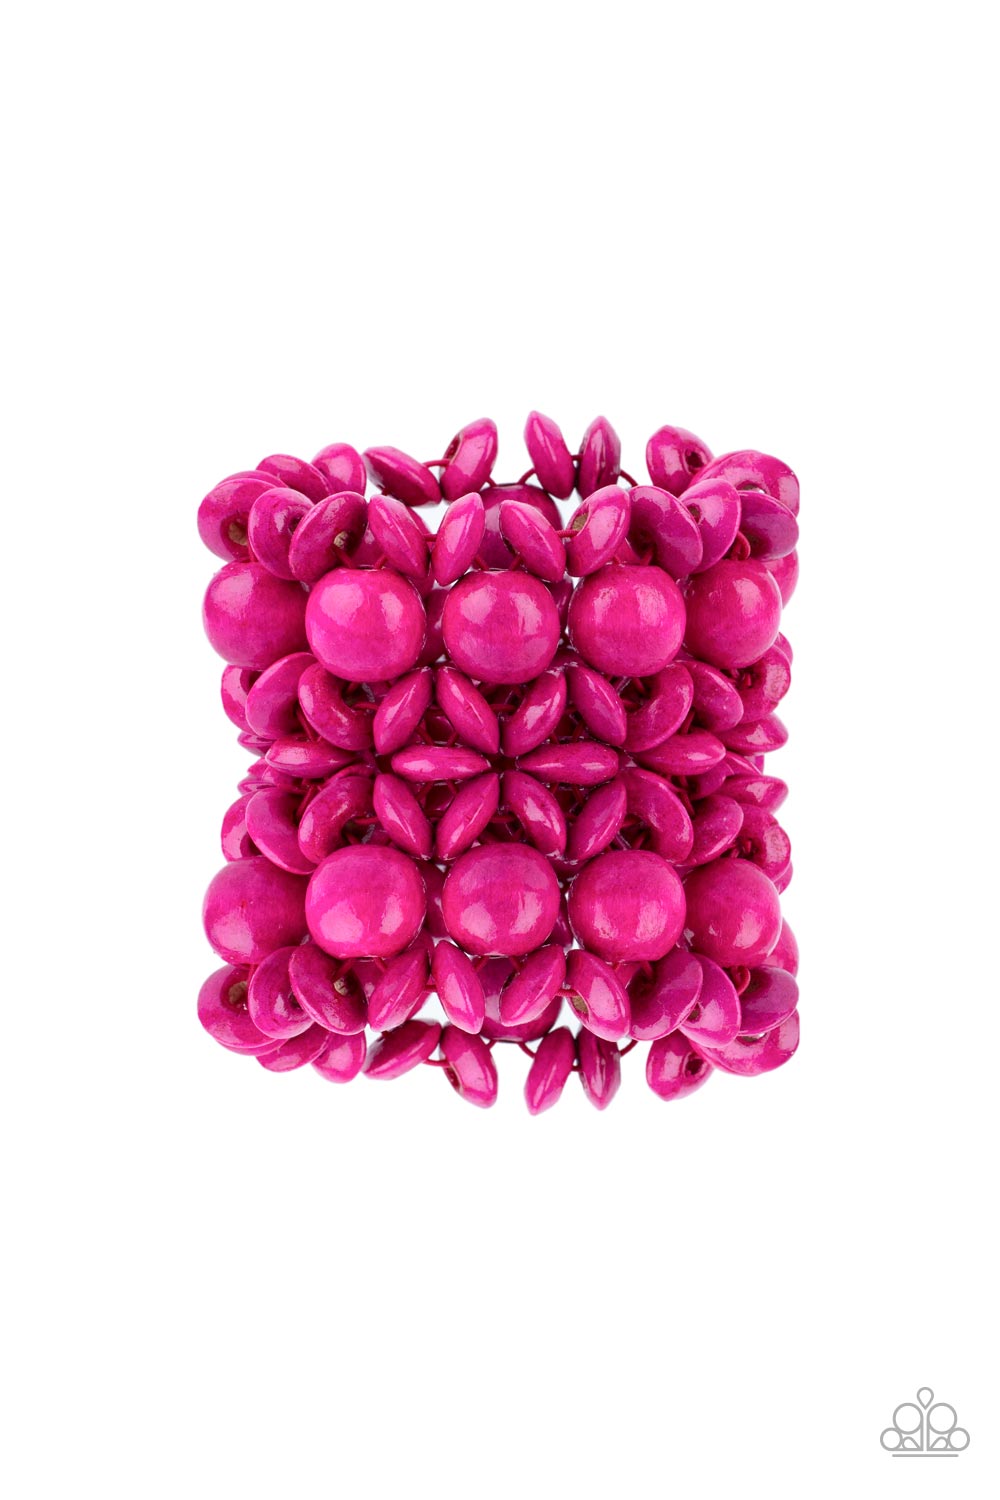 Paparazzi Accessories - Brushed in a vibrant pink finish, an oversized collection of disc shaped and round wooden beads are threaded along ornately knotted woven stretchy bands around the wrist for a tropical inspired fashion.